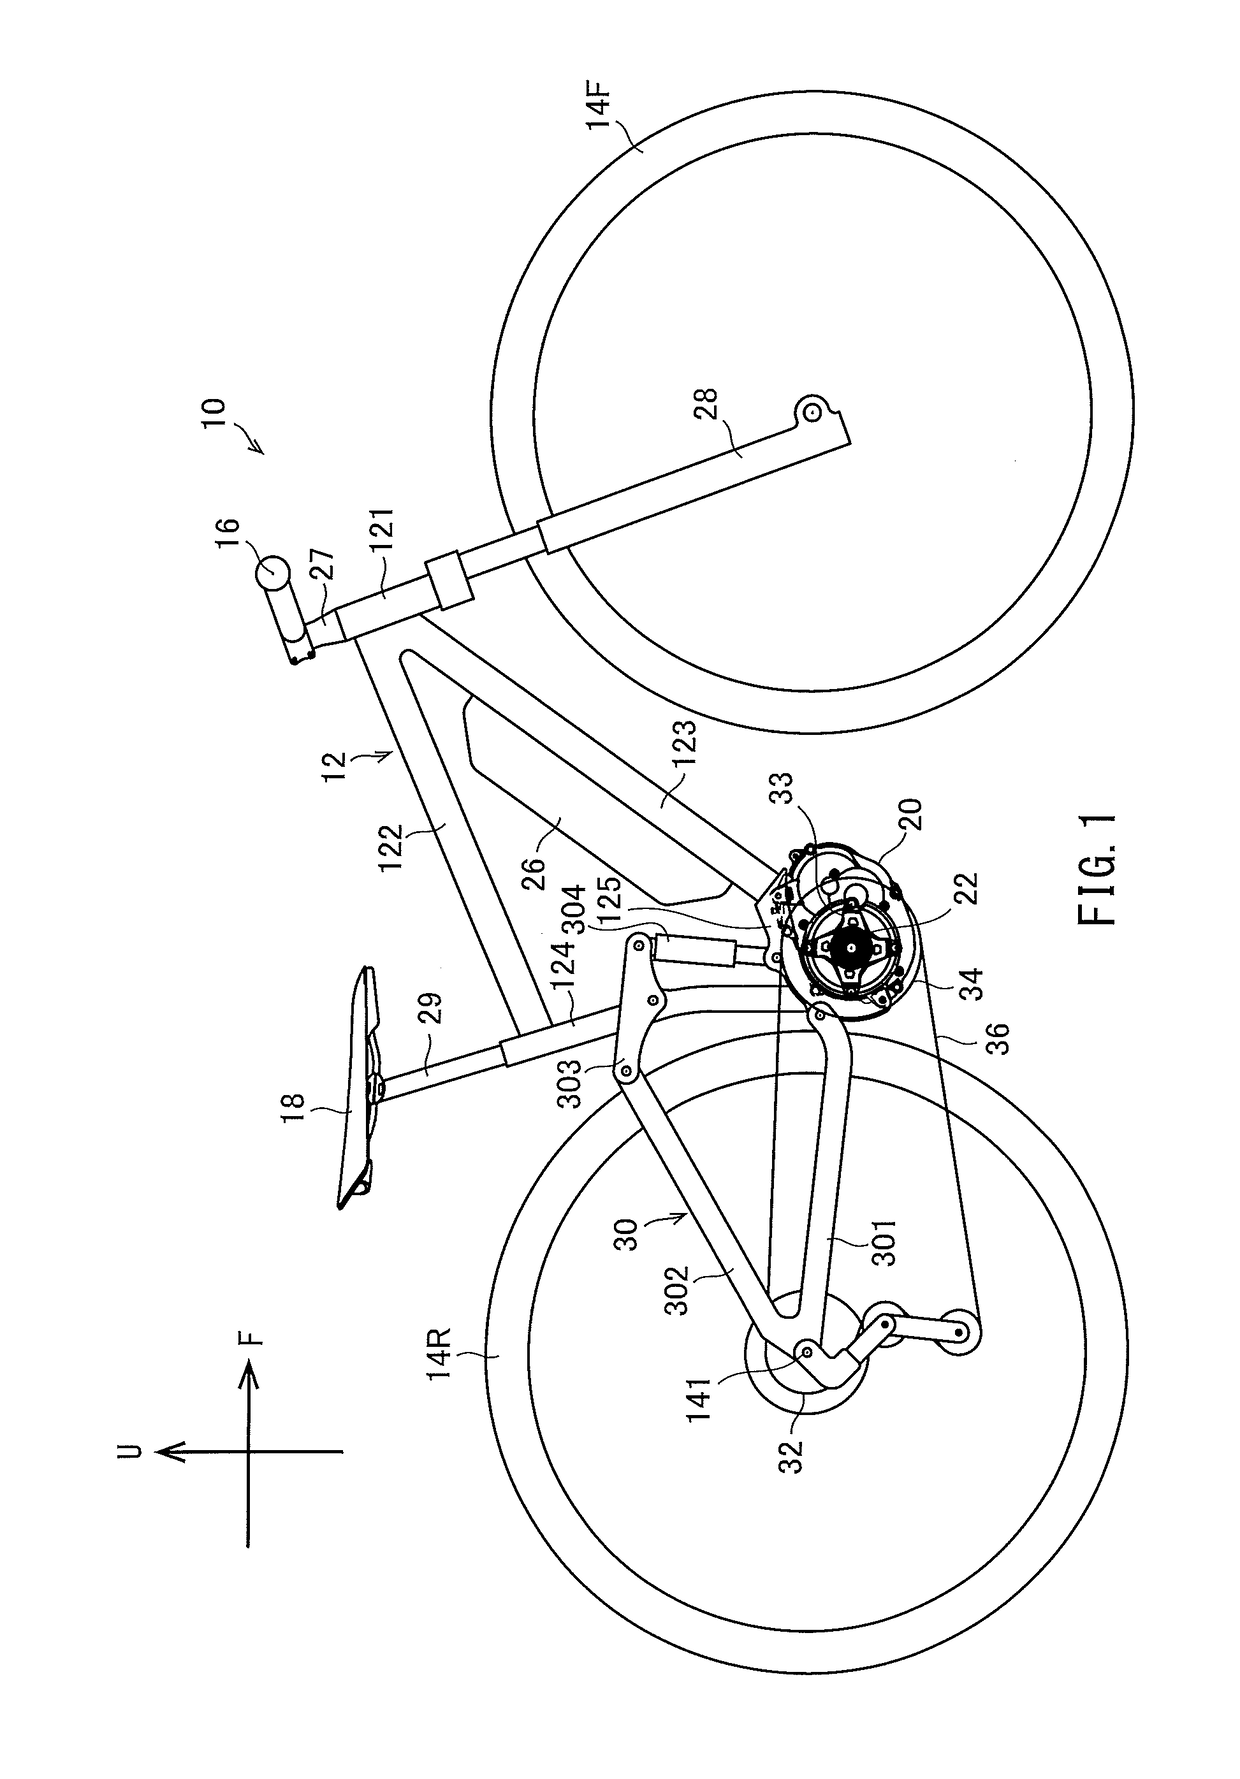 Electric-motor-assisted bicycle